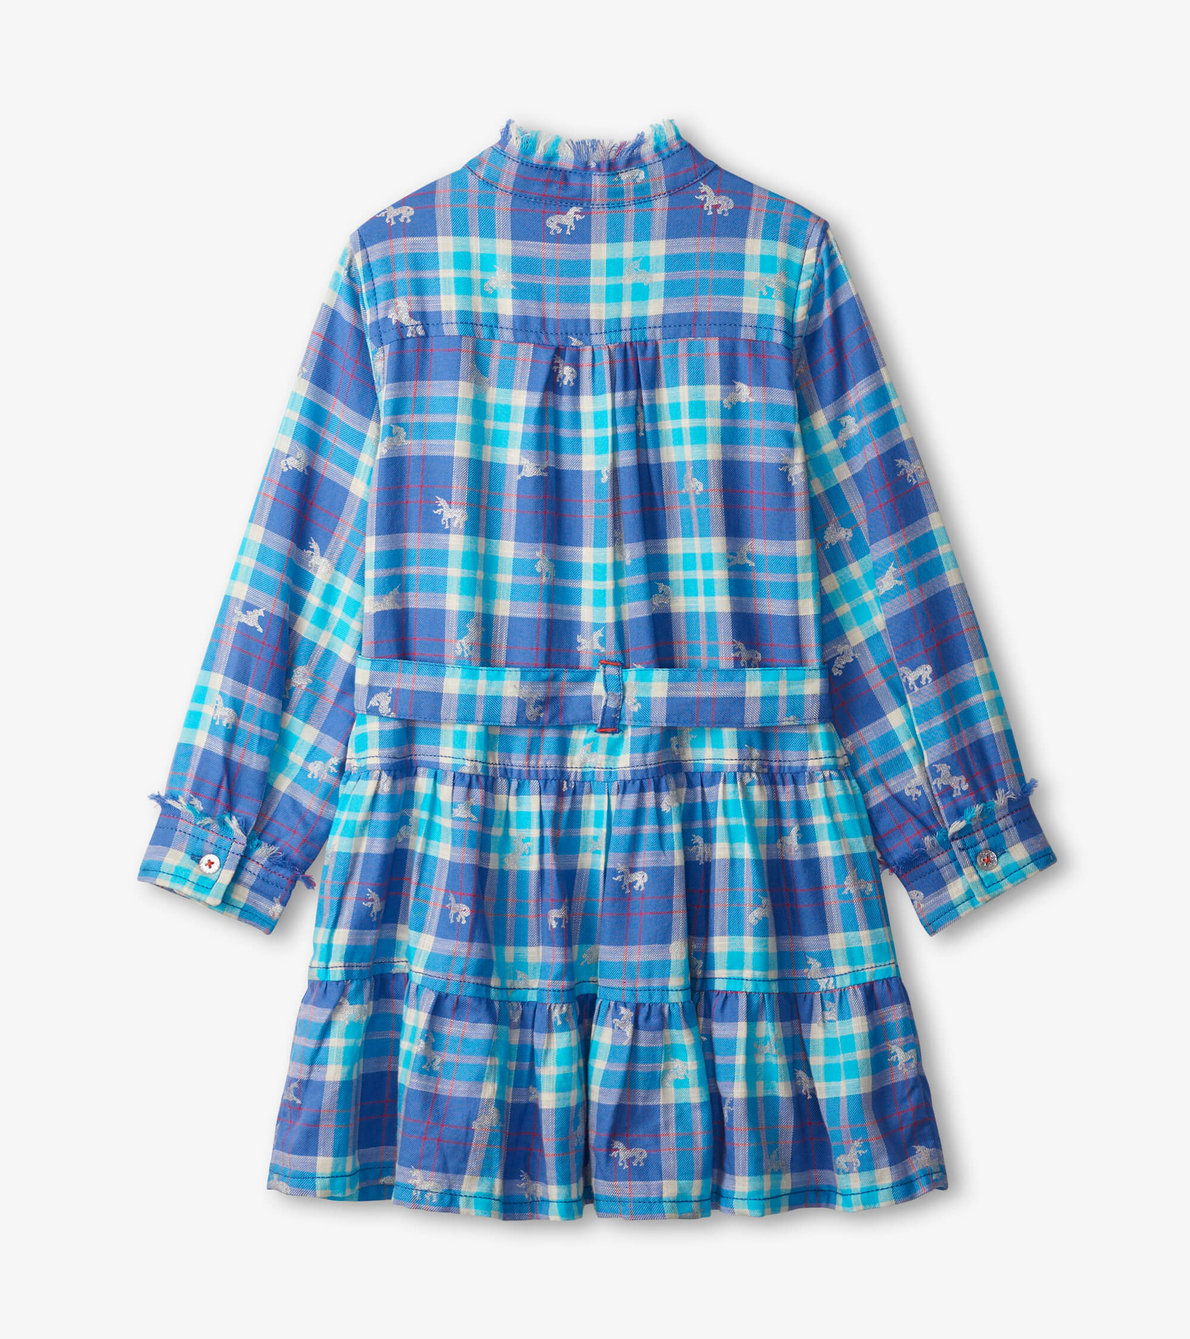 View larger image of Shimmer Unicorns Plaid Button Down Shirt Dress